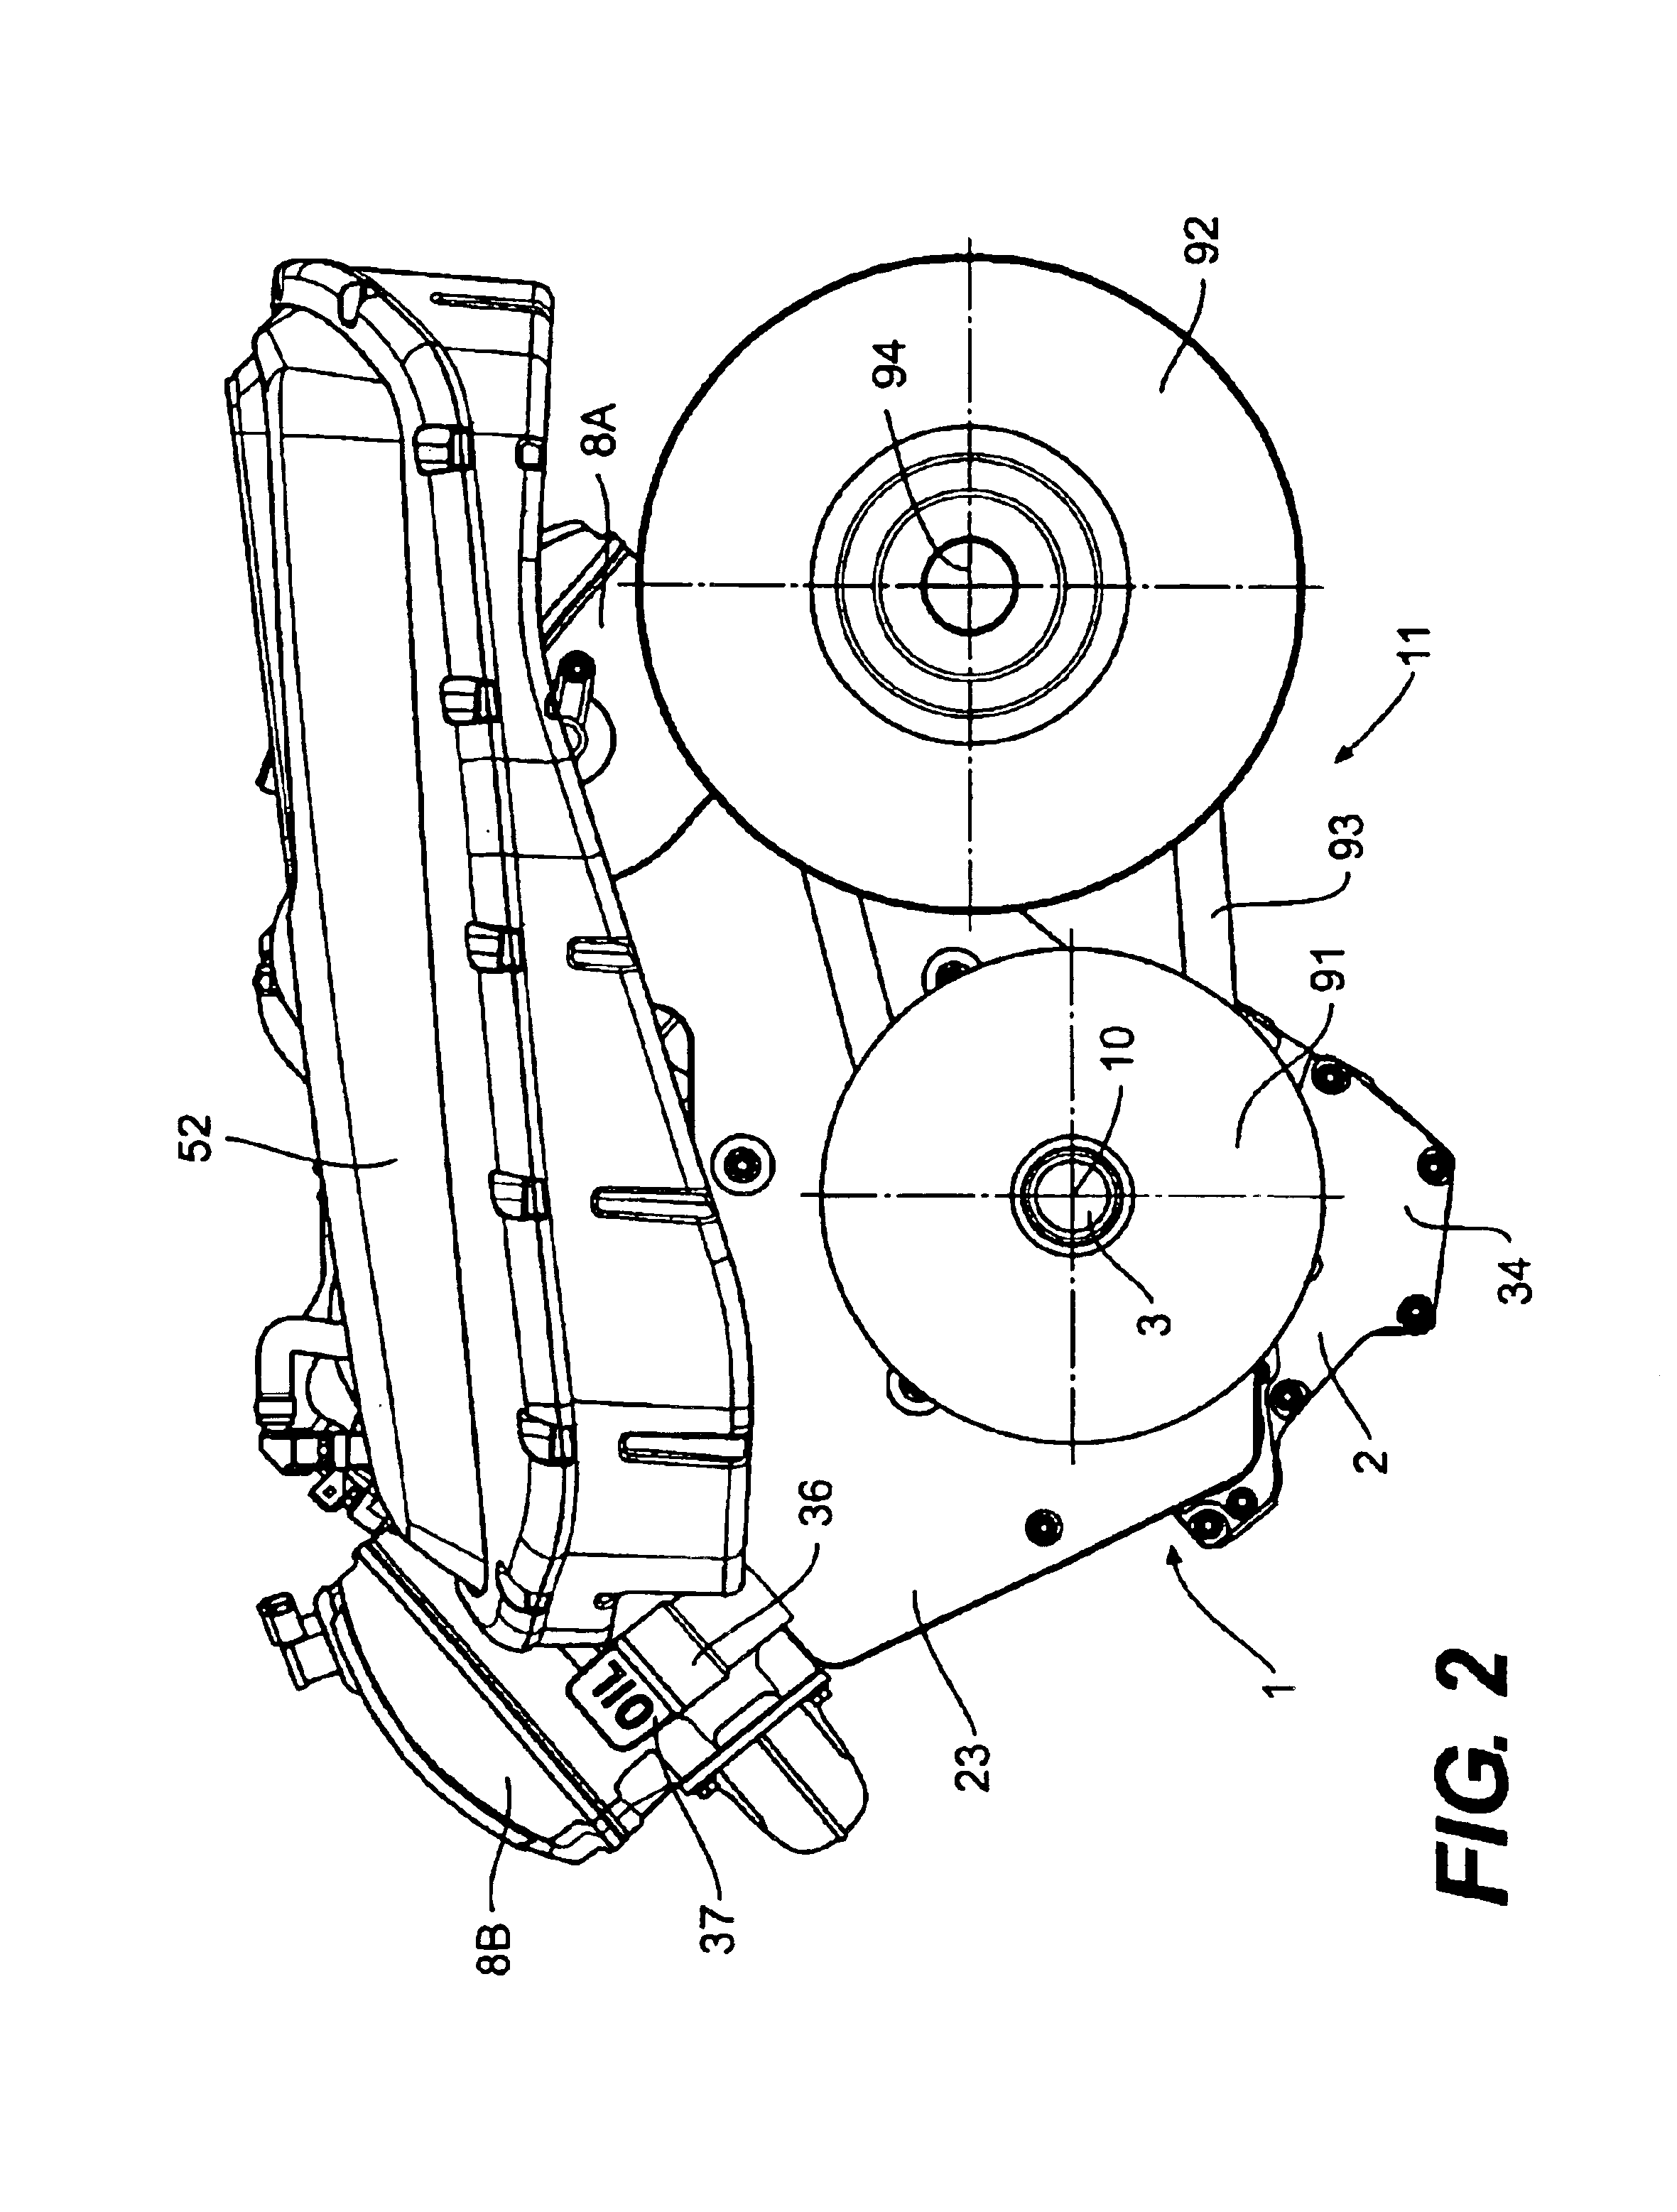 Engine arrangement for a four cycle engine